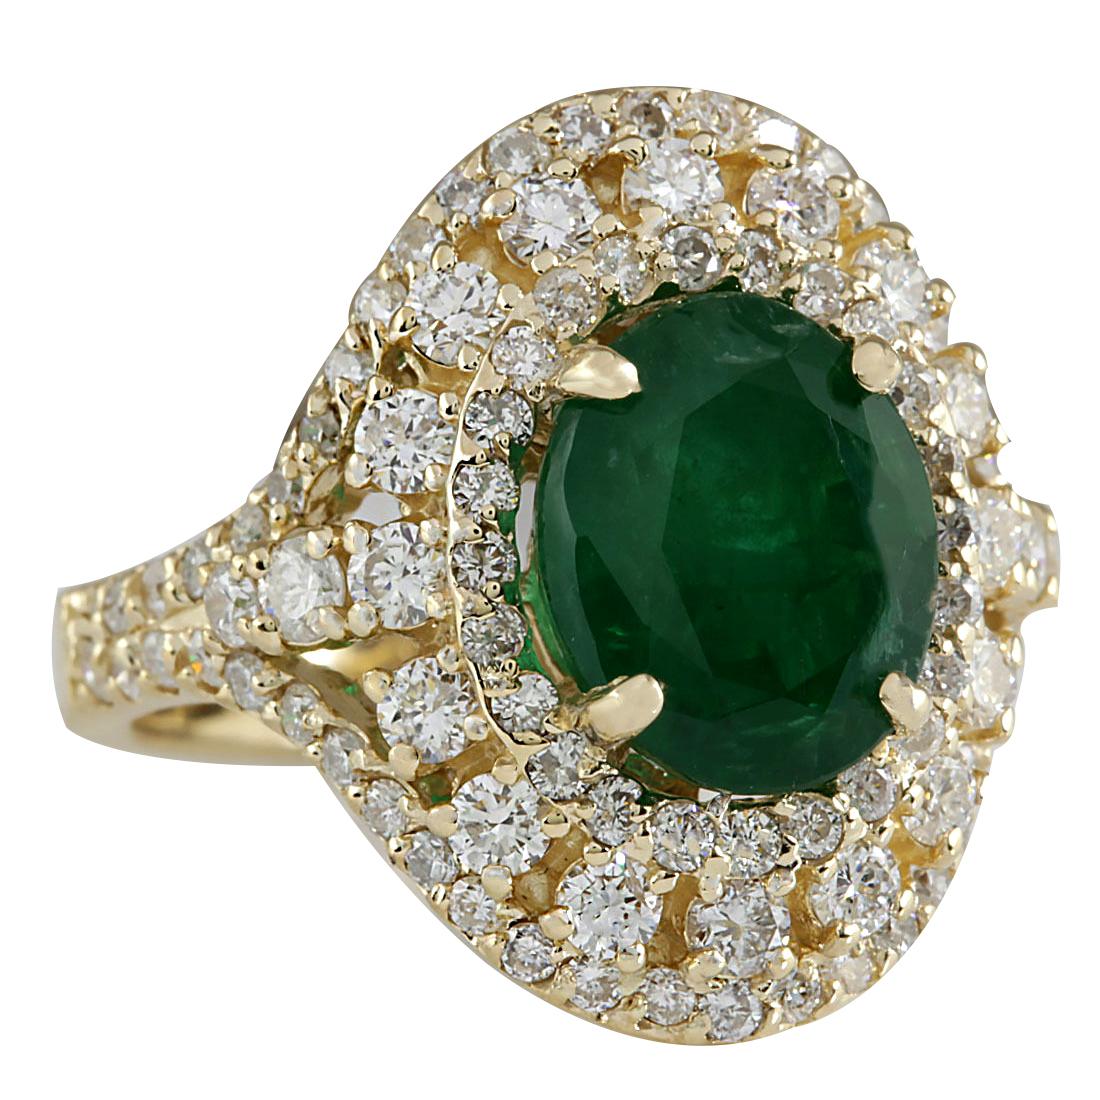 Stamped: 14K Yellow Gold
Total Ring Weight: 8.0 Grams
Total Natural Emerald Weight is 3.52 Carat (Measures: 10.00x8.00 mm)
Color: Green
Total Natural Diamond Weight is 1.50 Carat
Color: F-G, Clarity: VS2-SI1
Face Measures: 20.00x18.20 mm
Sku: